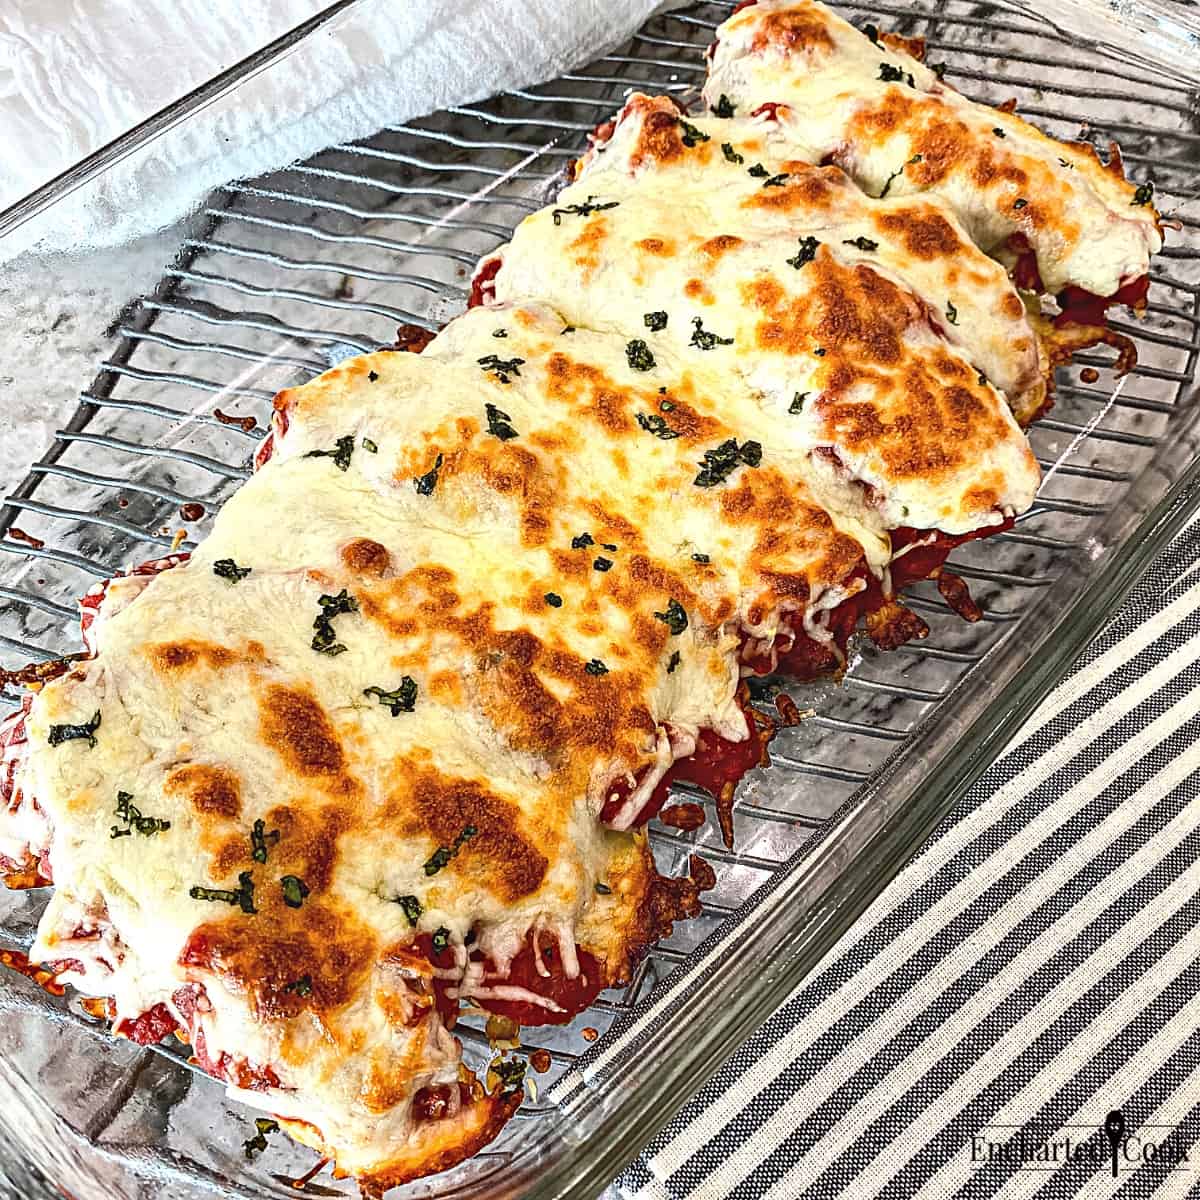 Chicken Tenders Parmesan are smothered in marinara sauce and topped with cheese in a glass baking dish.